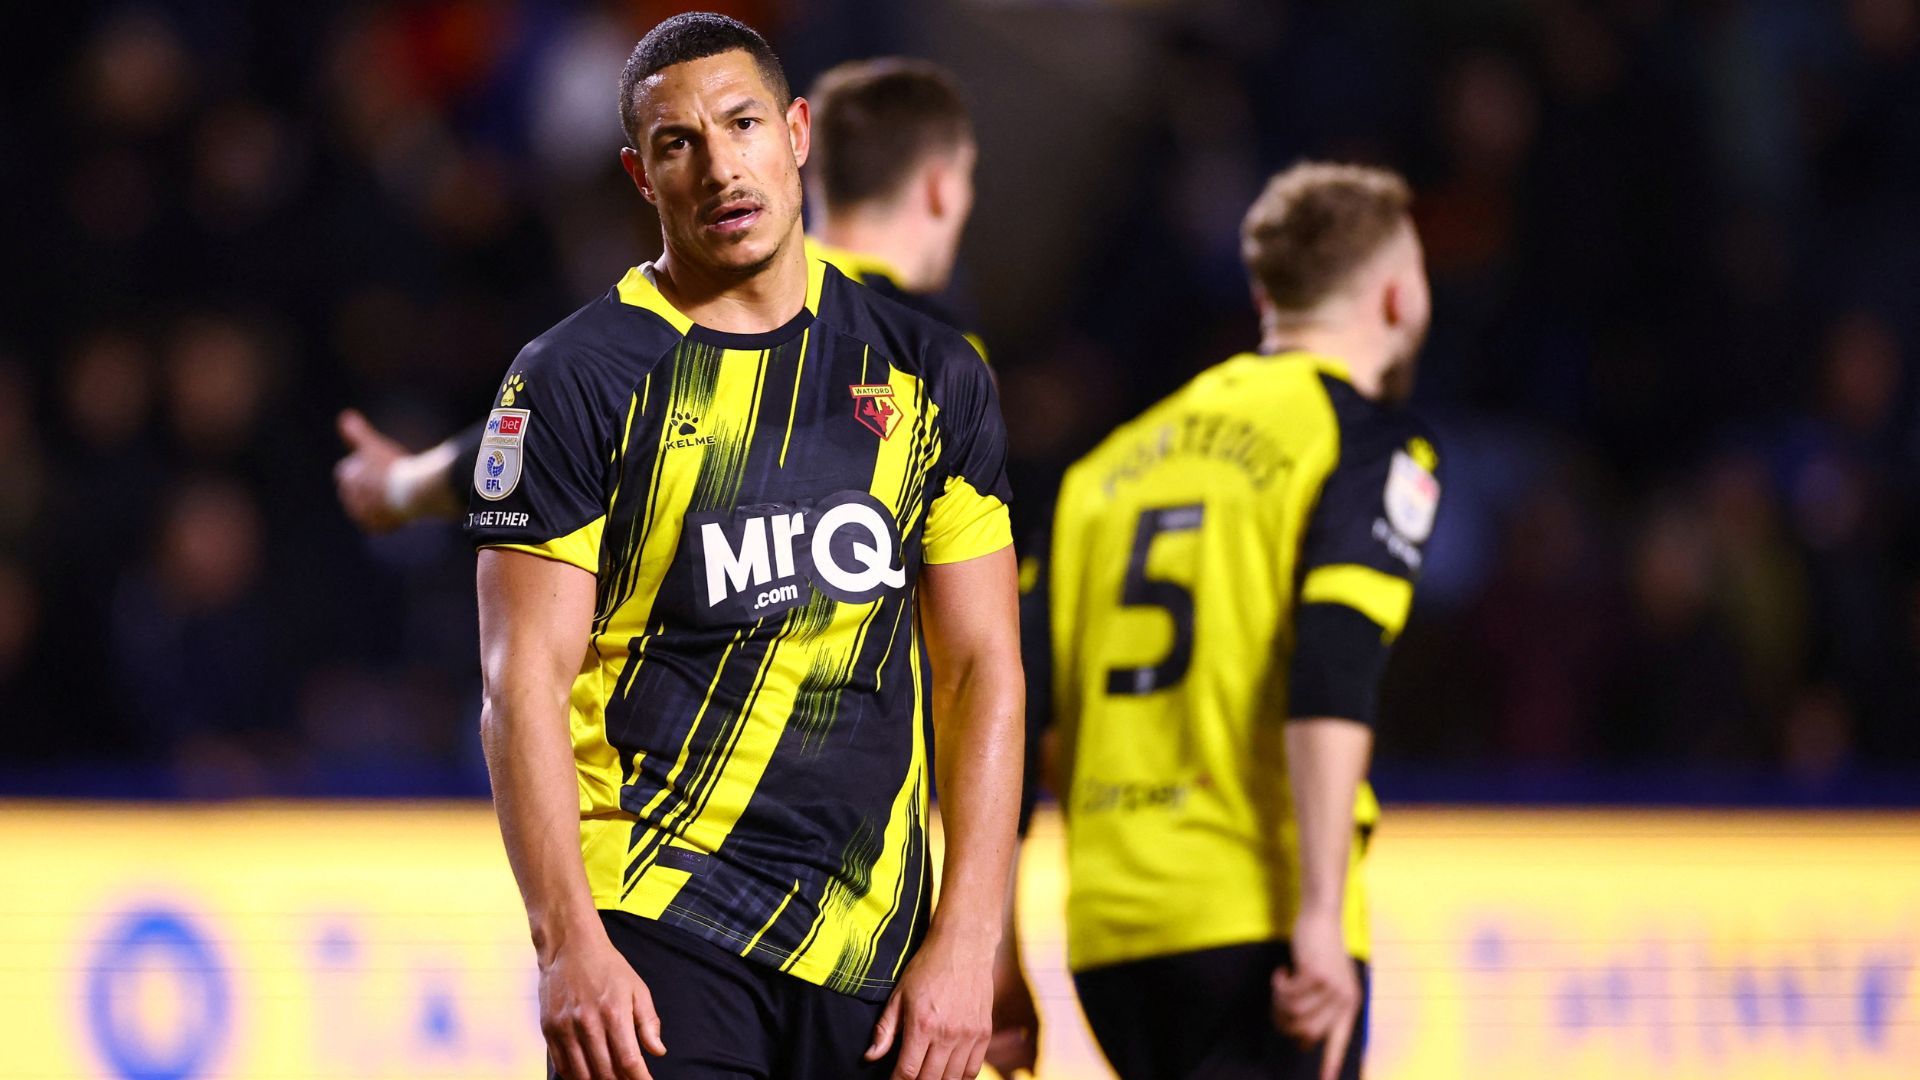 Jake Livermore playing for Watford vs Sheffield Wednesday